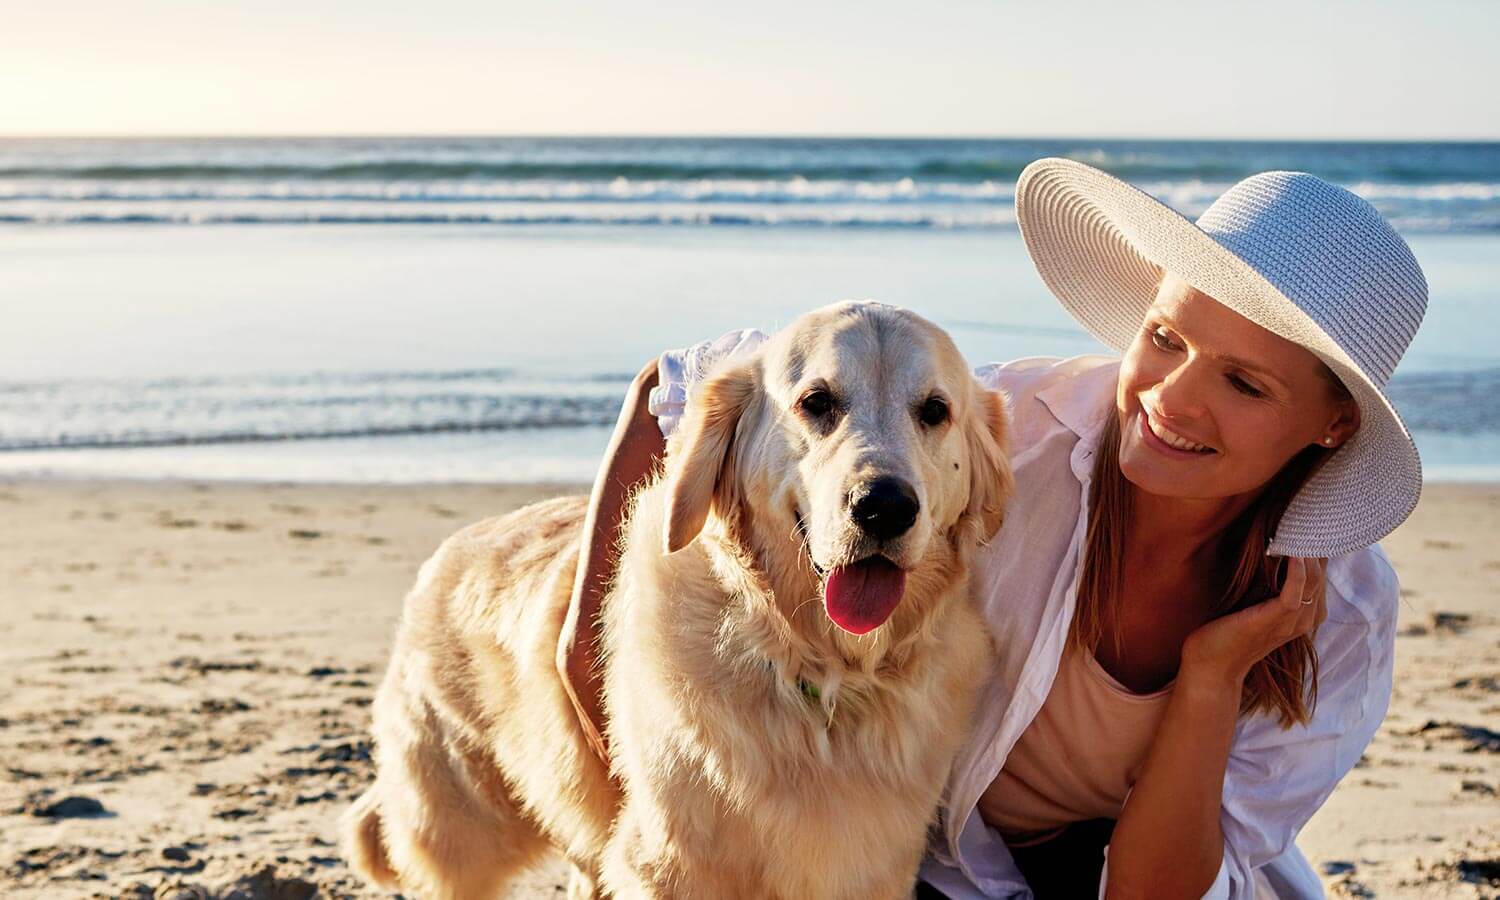 A woman and dog on the beach